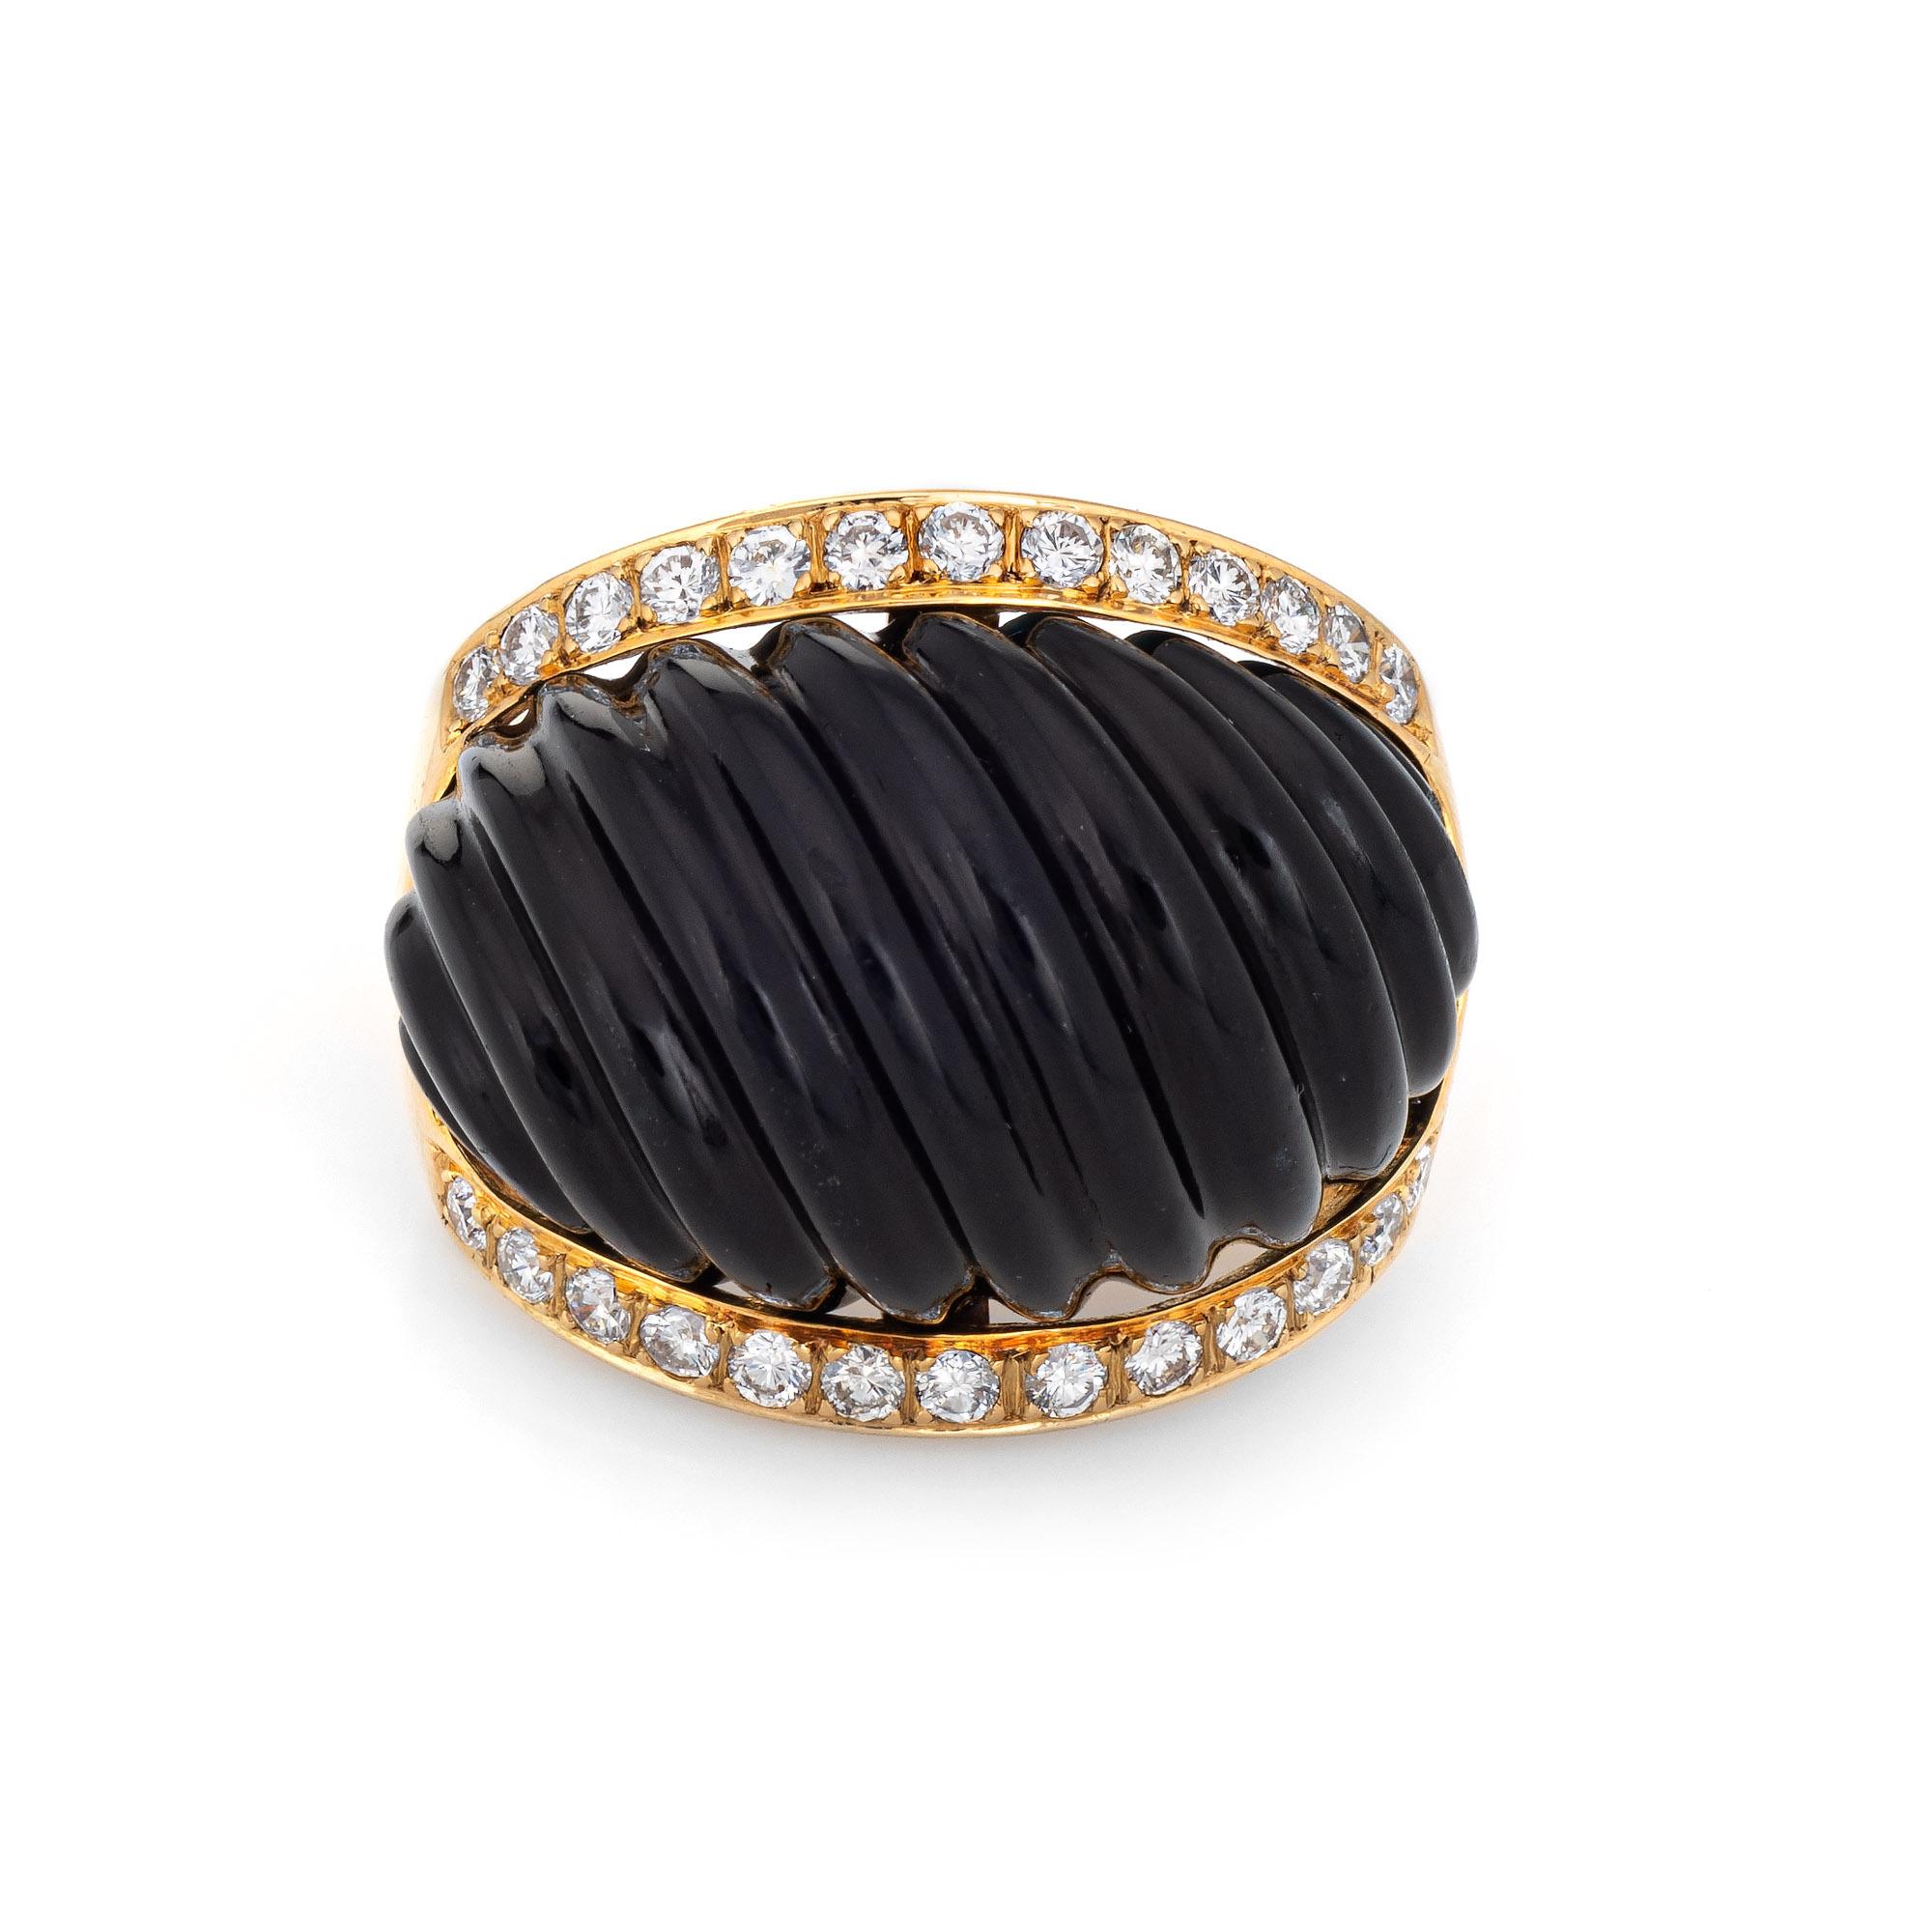 Stylish vintage fluted onyx & diamond cocktail ring (circa 1950s to 1960s) crafted in 18 karat yellow gold. 

Fluted onyx measures 28mm x 15mm. Diamonds total an estimated 0.50 carats (estimated at H-I color and SI1-2 clarity). The onyx is in very